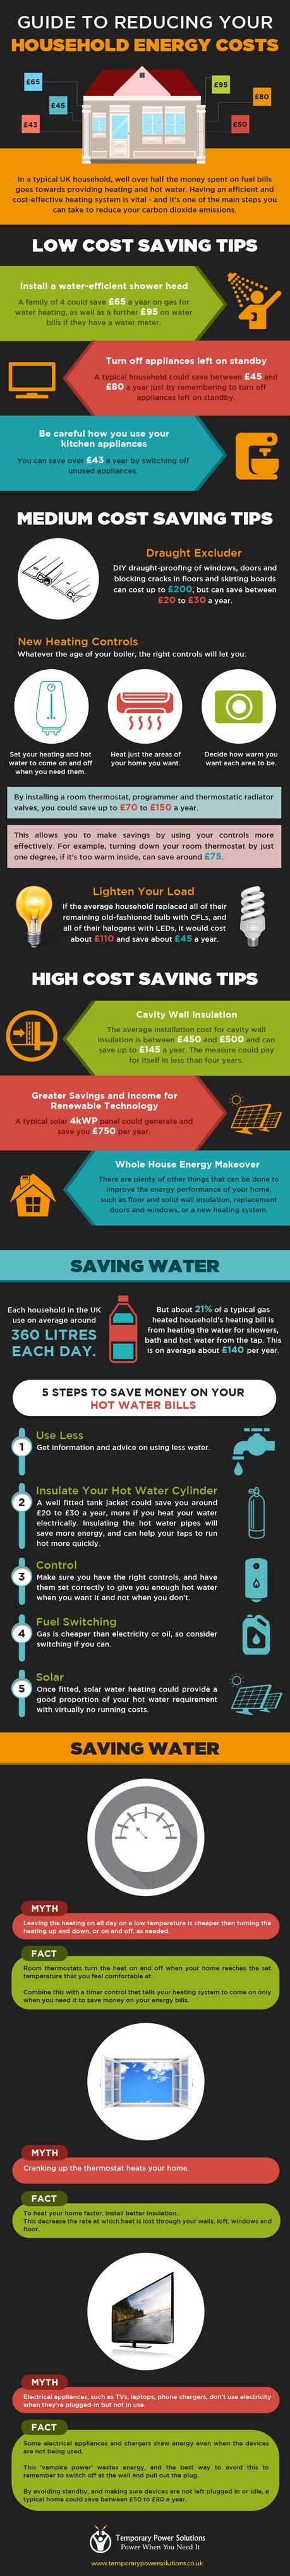 guide-to-reducing-your-household-energy-costs